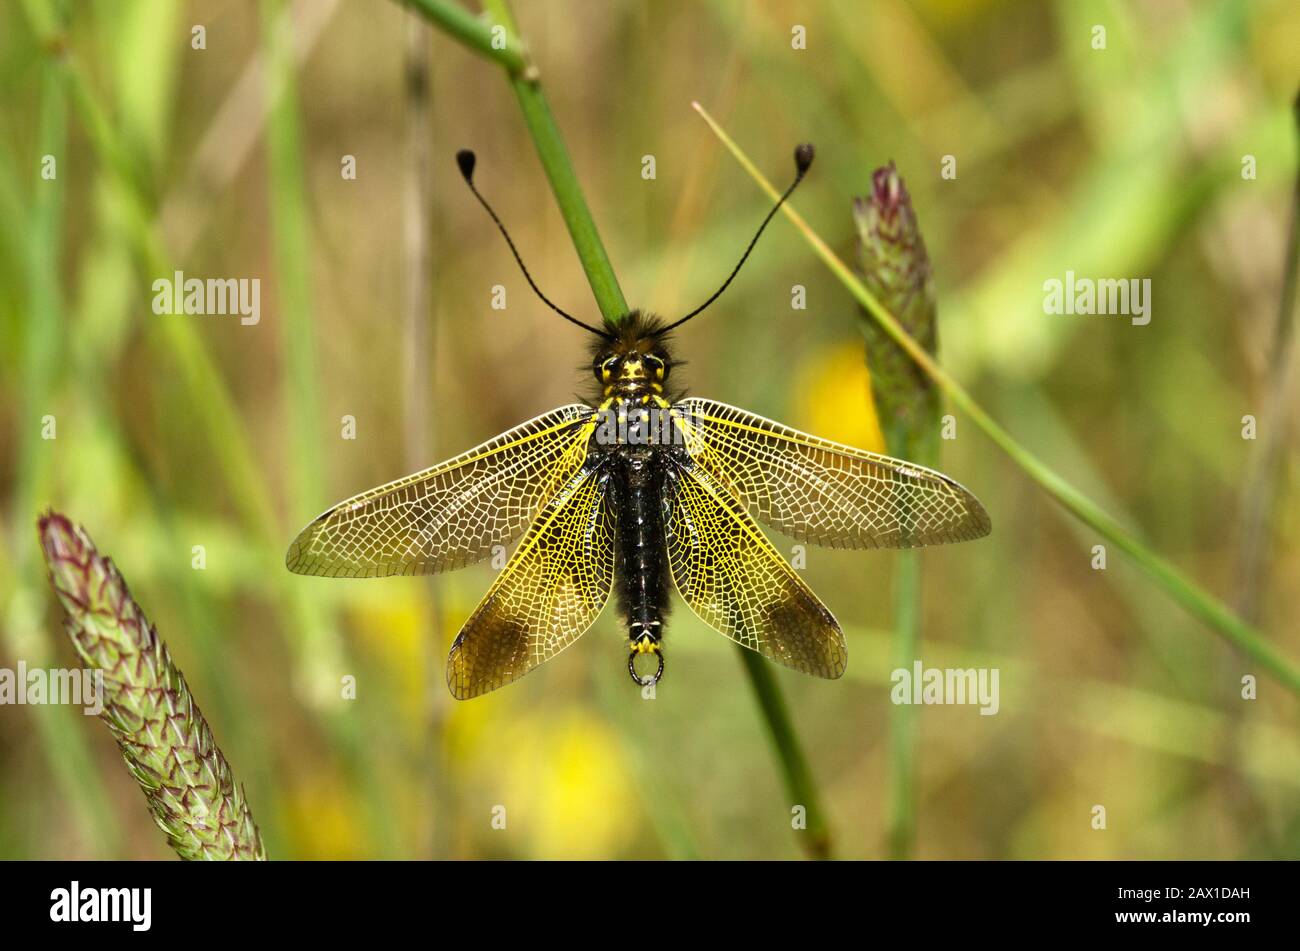 Owlfly (Libelloides ictericus of Ascalaphidae family) set on a green weed stem with its wing wide open and long clubbed antennae pointing up. Stock Photo